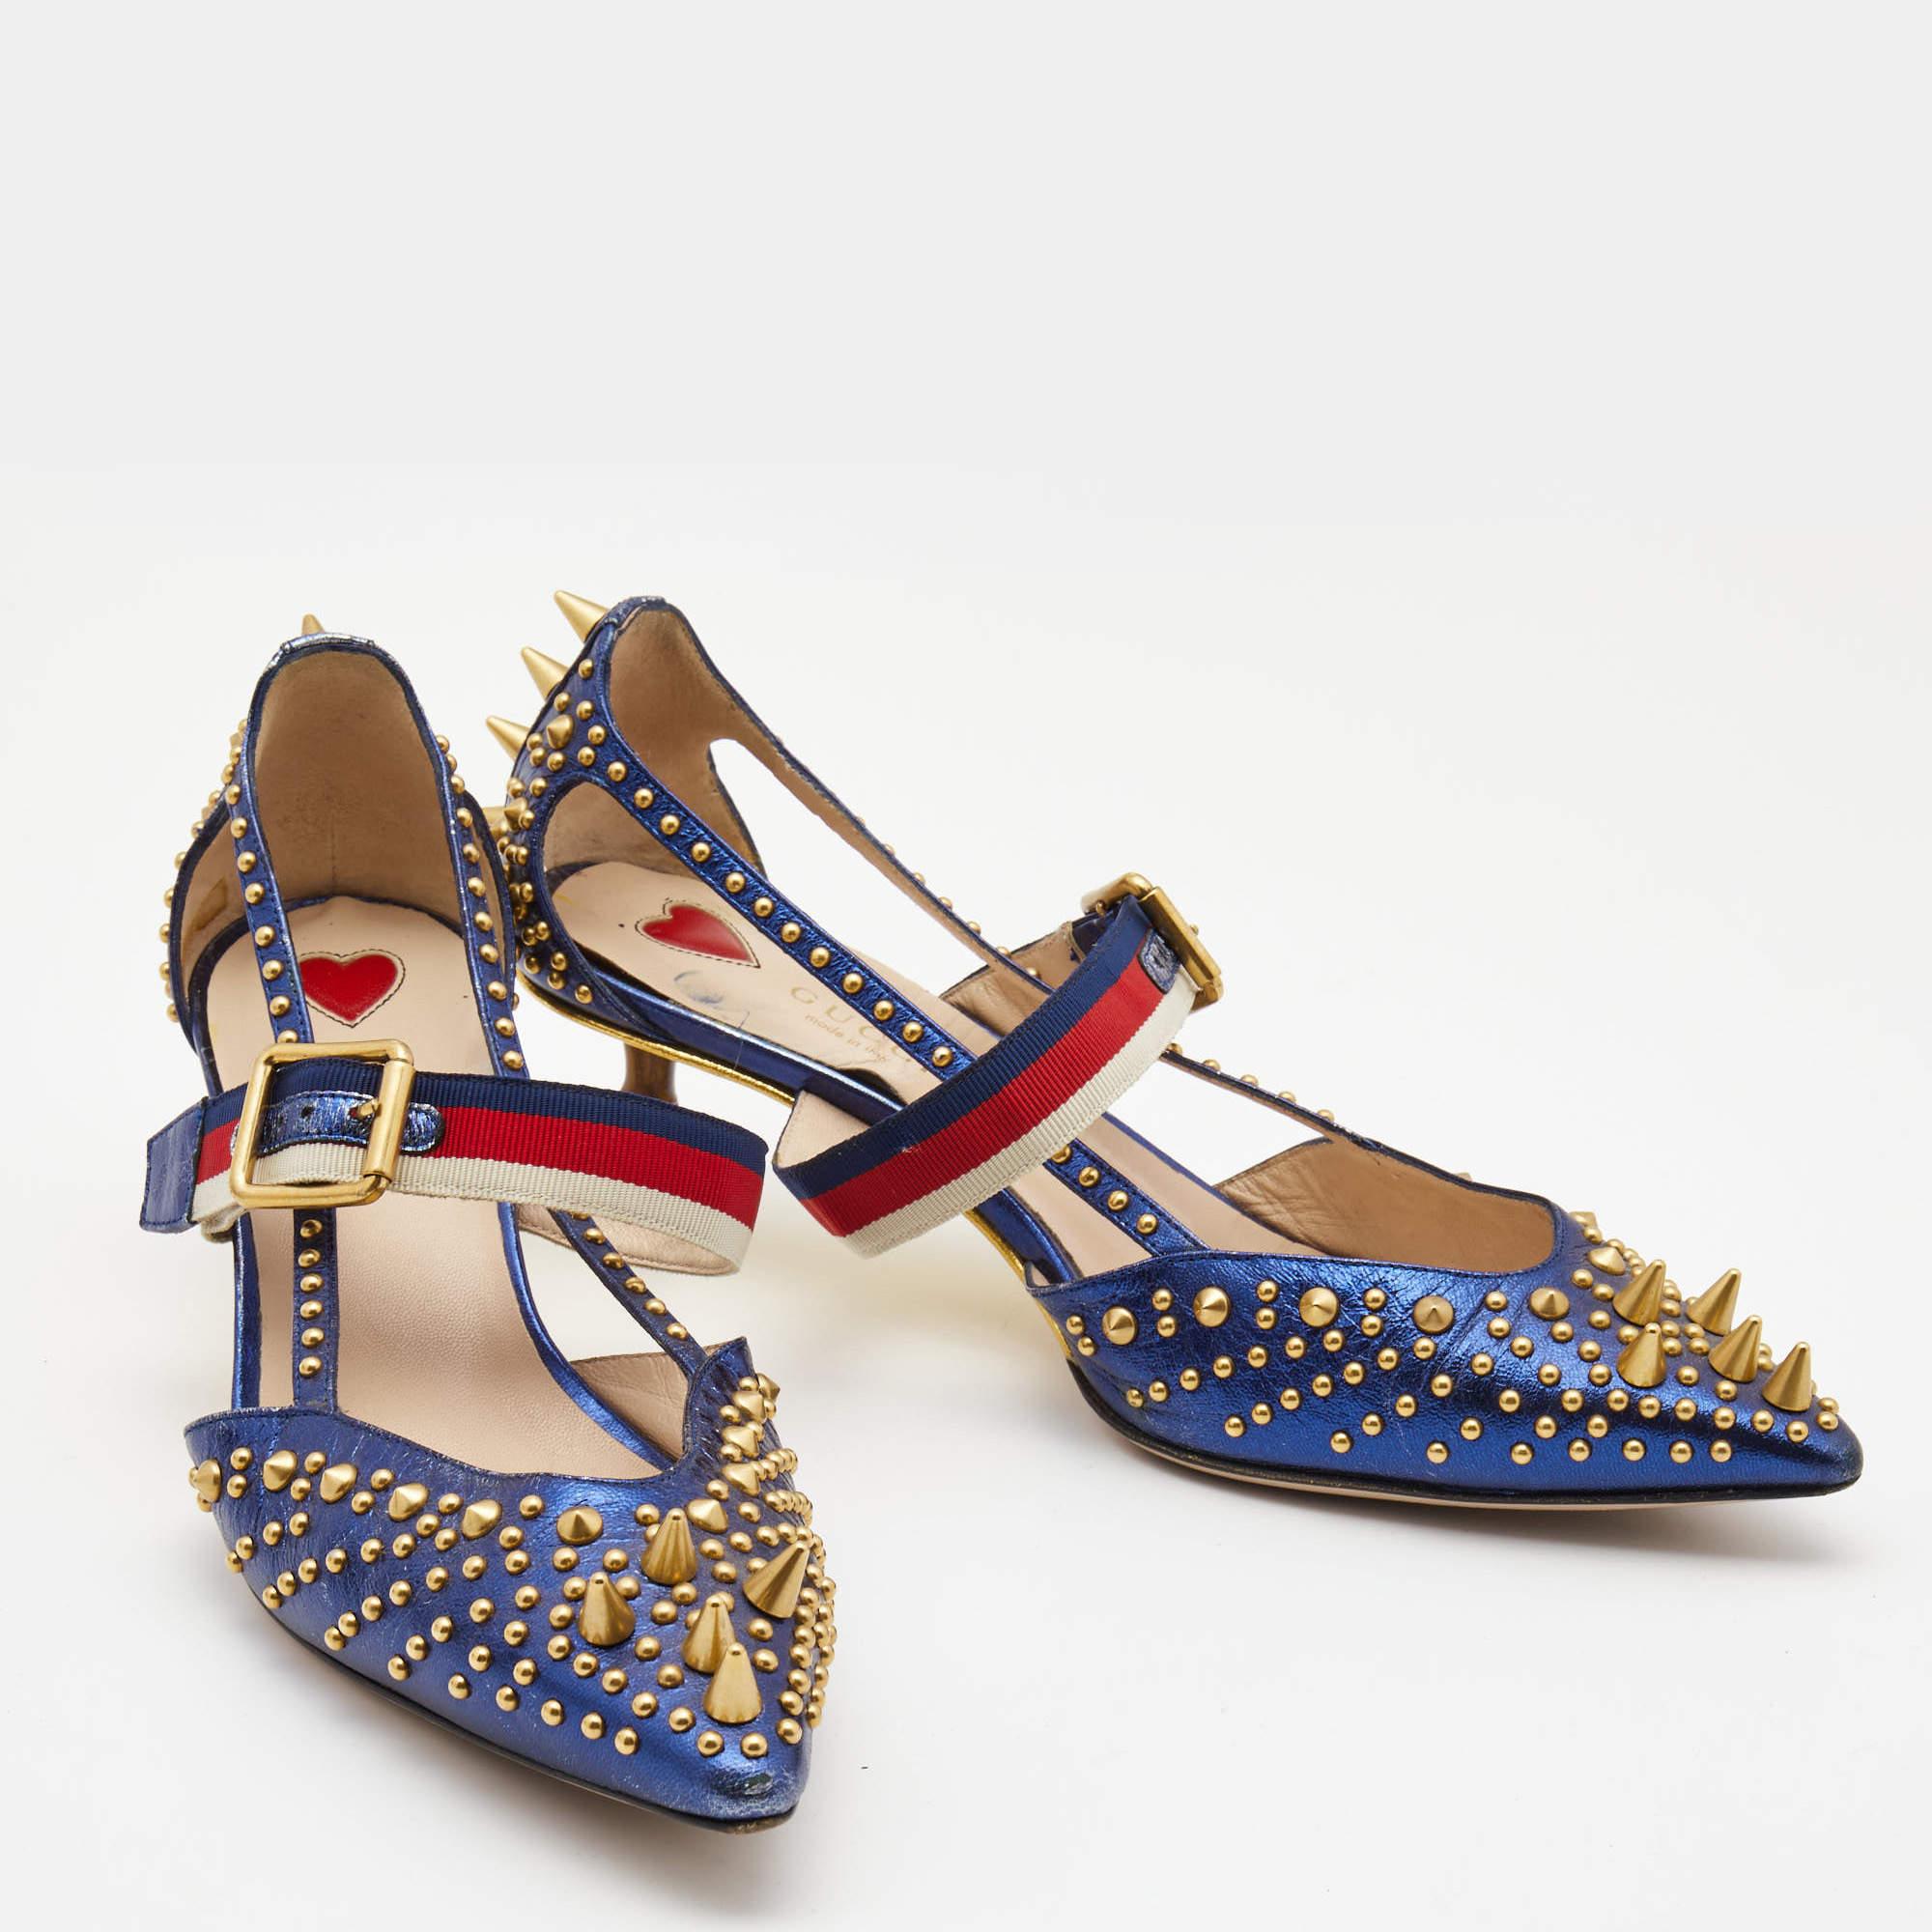 These pointed-toe Unia pumps from Gucci have come straight from a shoe lover's dream. Crafted from blue leather, detailed with gold-tone studs all over along with signature Web straps on the ankle and are balanced on short bamboo heels. The pumps